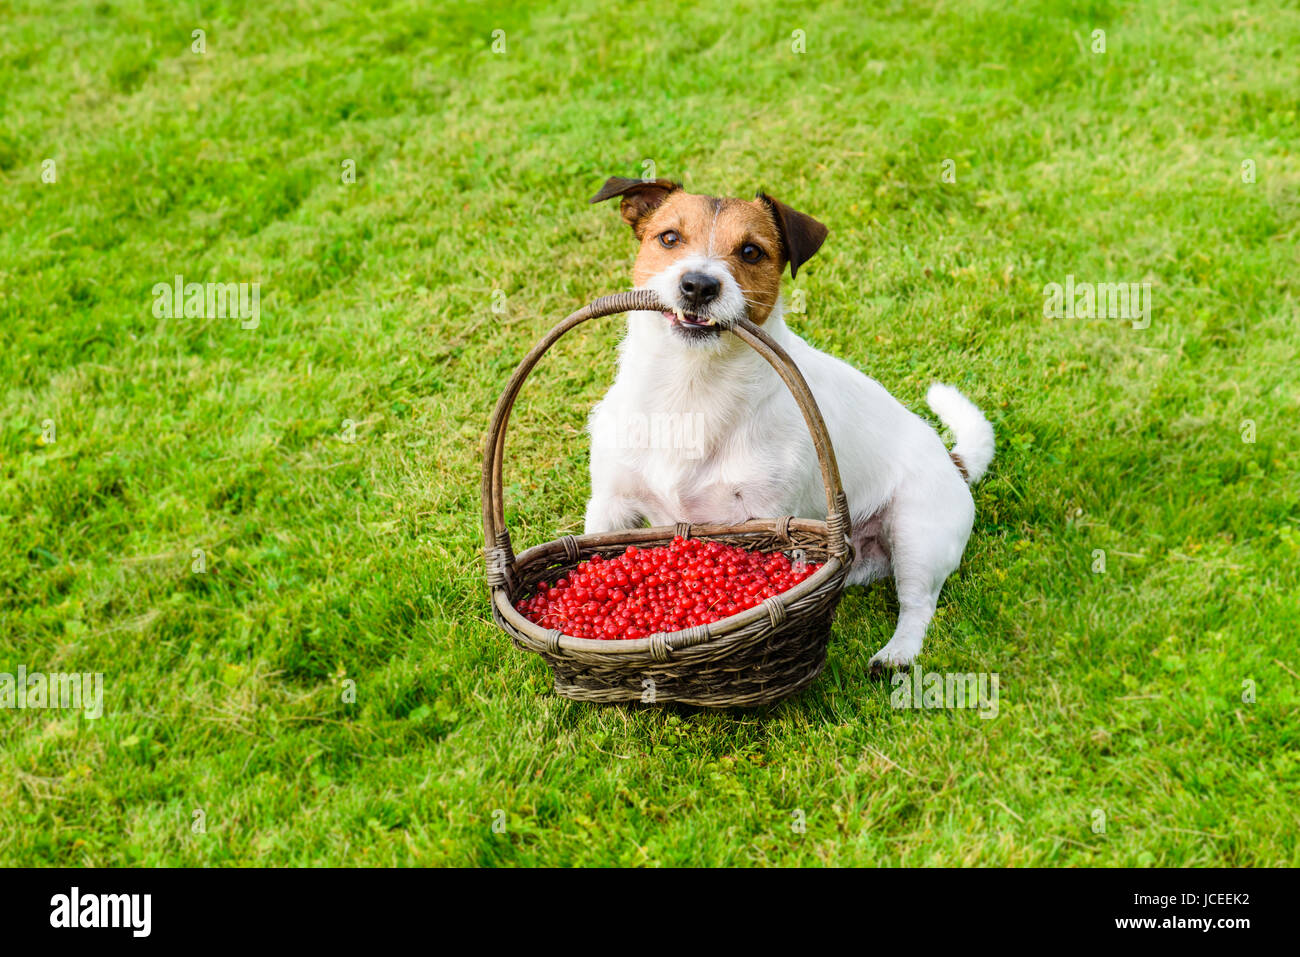 Cute gardener carrying basket full of red berries at green grass lawn Stock Photo